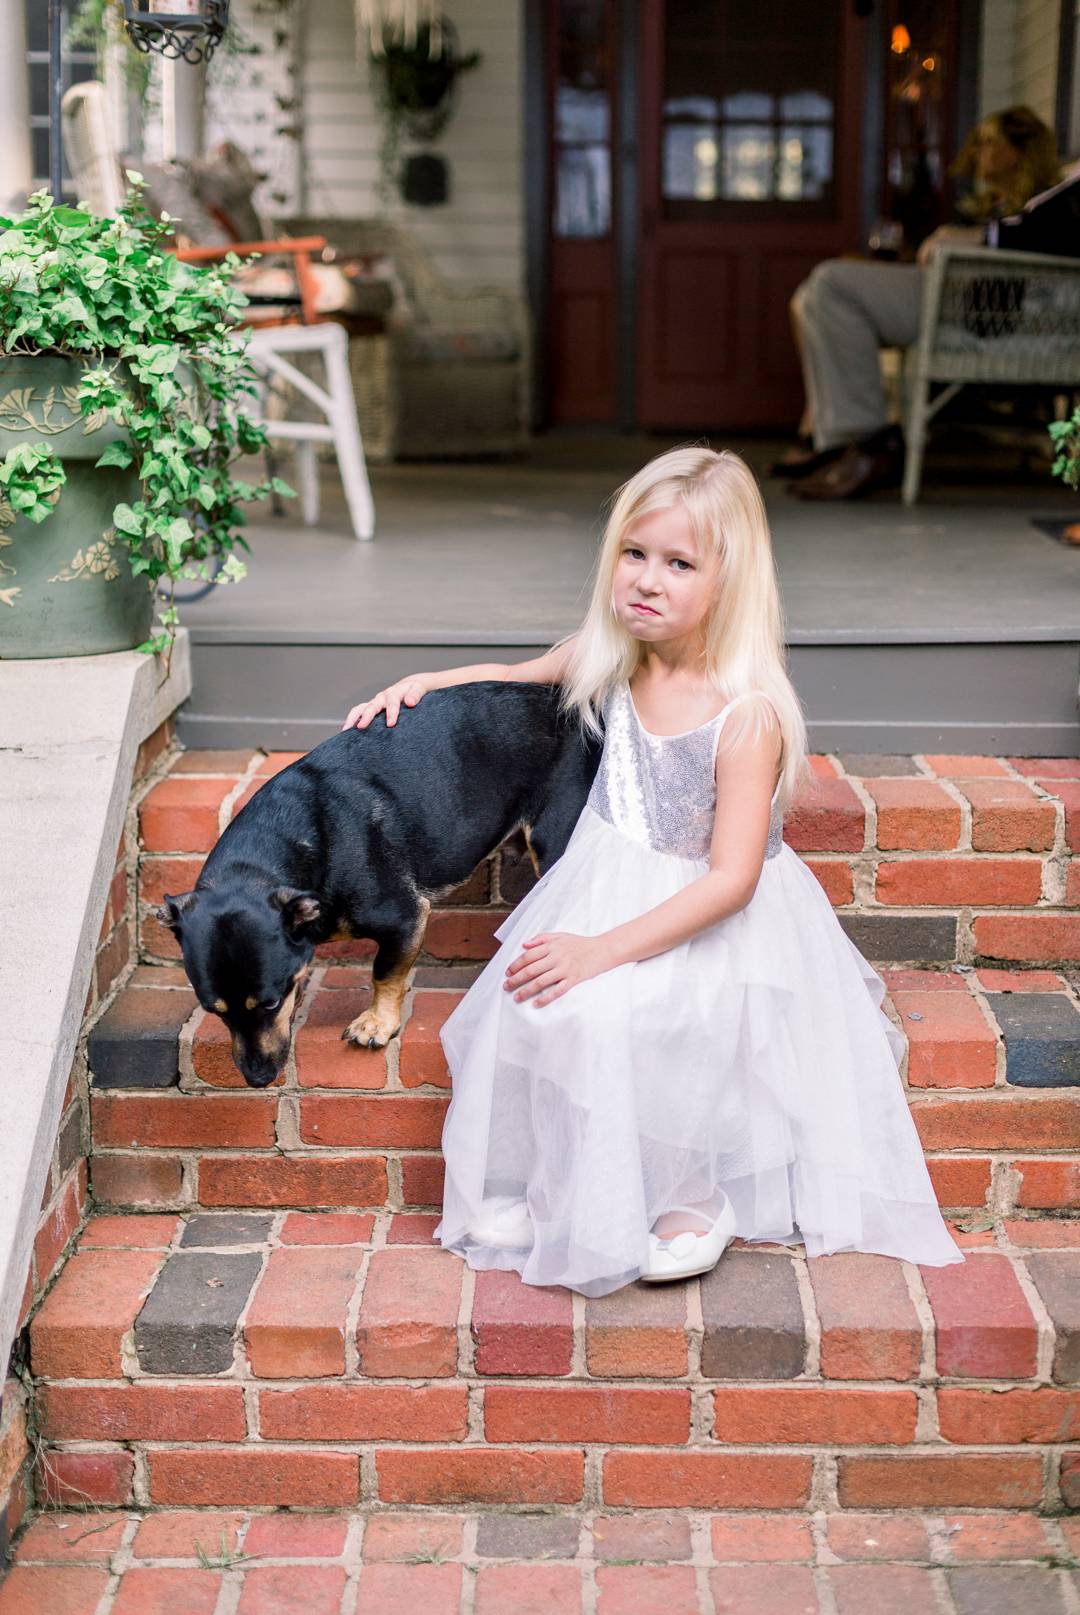 Pup and flower girl make silly faces before the wedding. 